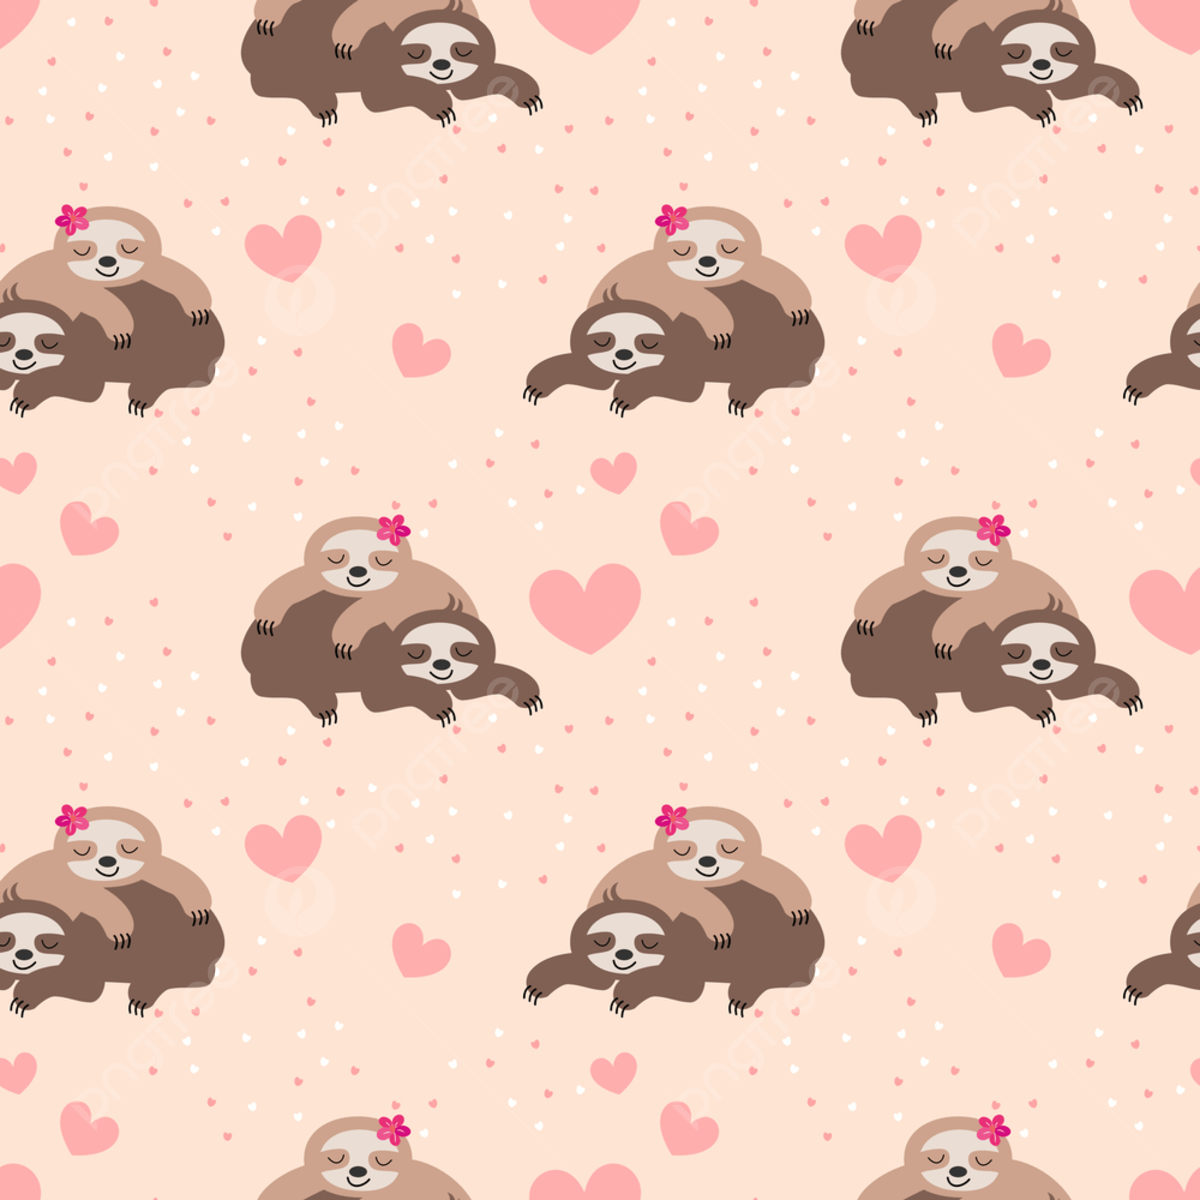 Cute Couple Sloth Seamless Pattern Background, Romantic, Cartoon, Sitting Background Image And Wallpaper for Free Download